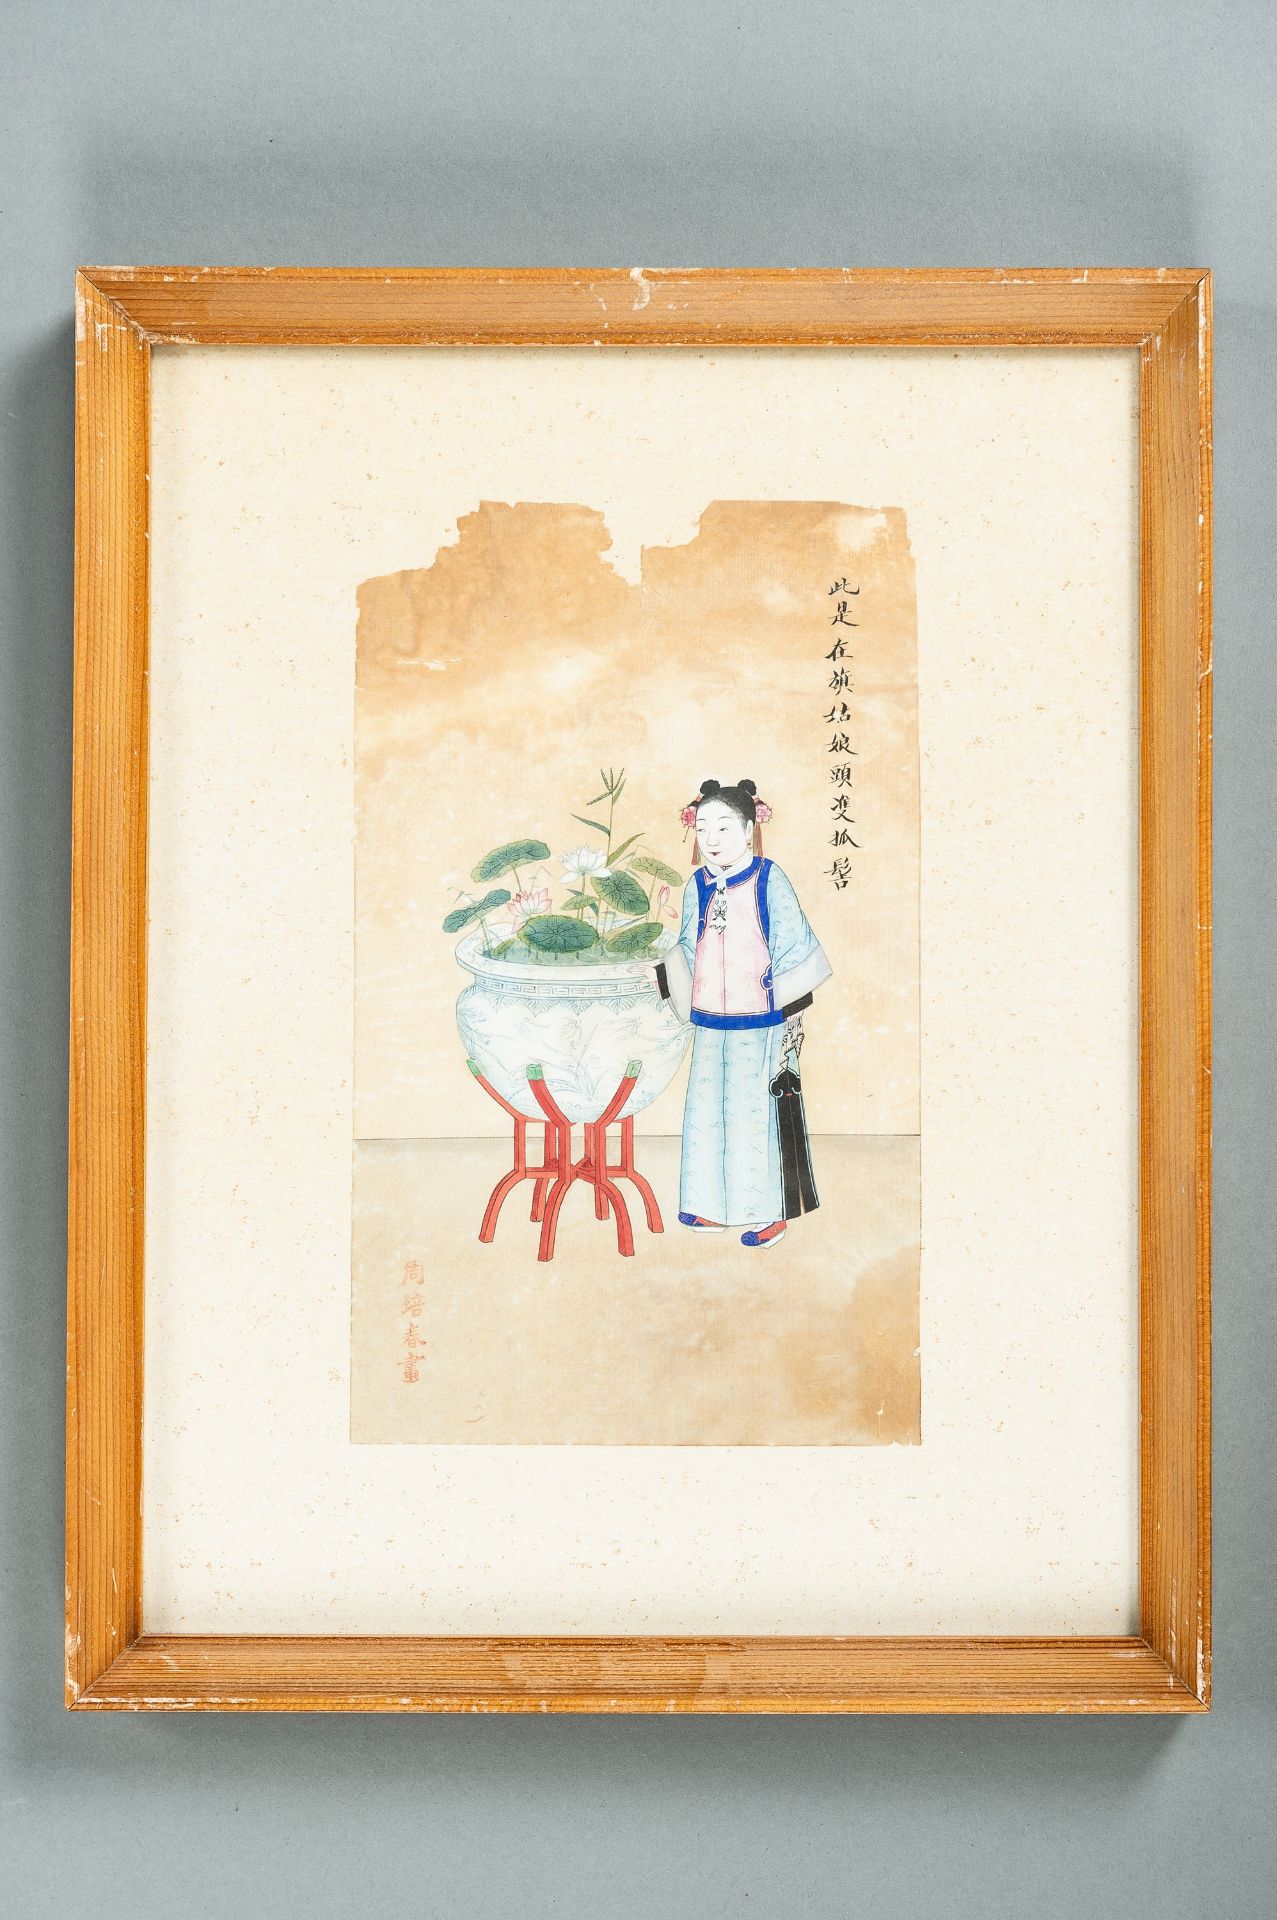 ZHOU PEI CHUN (active 1880-1910): A PAINTING OF A MANCHU COURT LADY BY A FISHBOWL, 1900s - Image 2 of 5